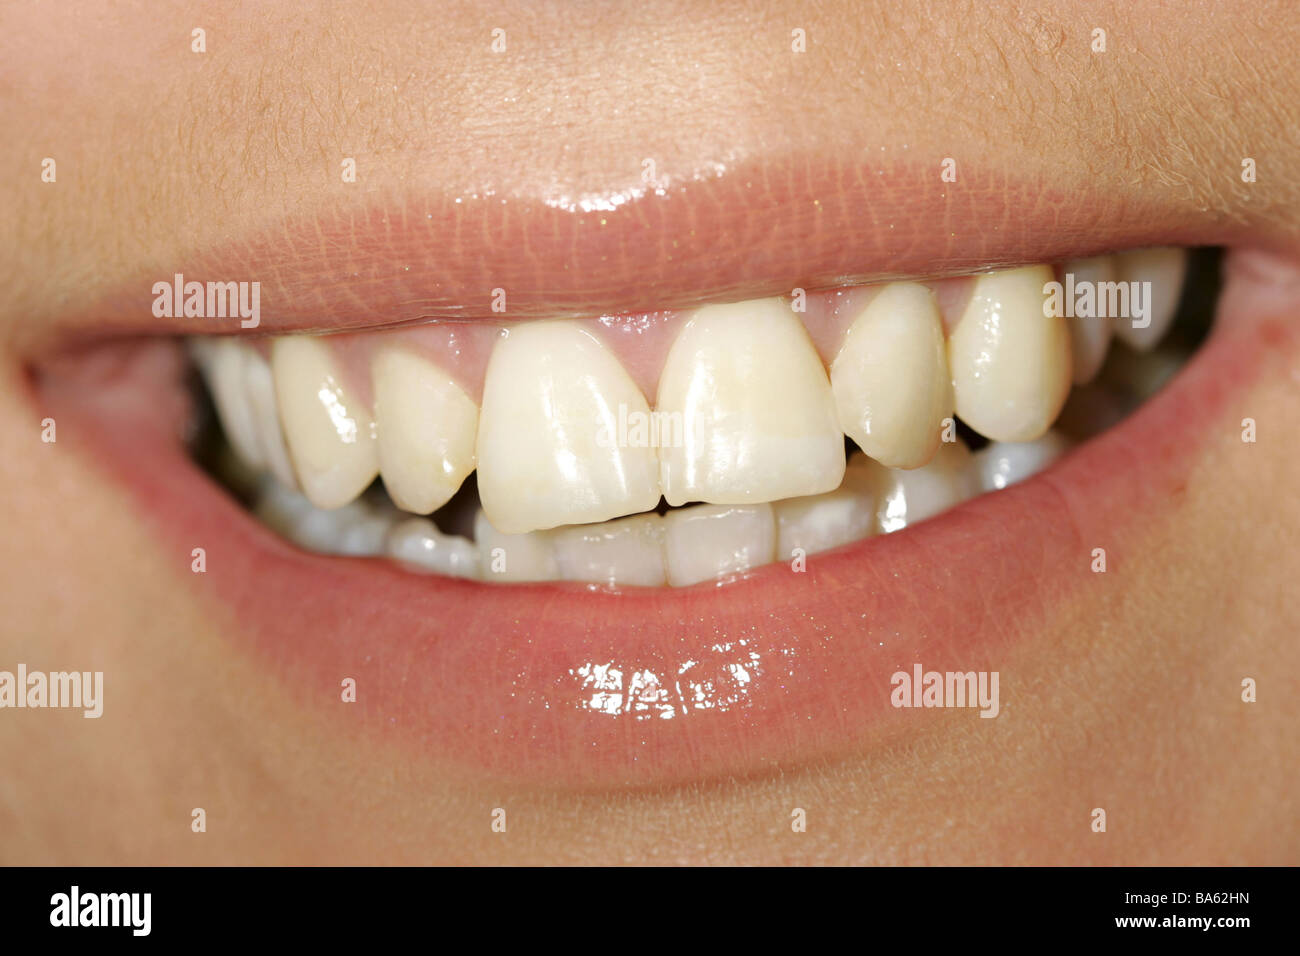 Woman face mouth close-up young mouth-part lips teeth smiles knows denture Sinnesorgan tastes speaks expression happy close-up Stock Photo